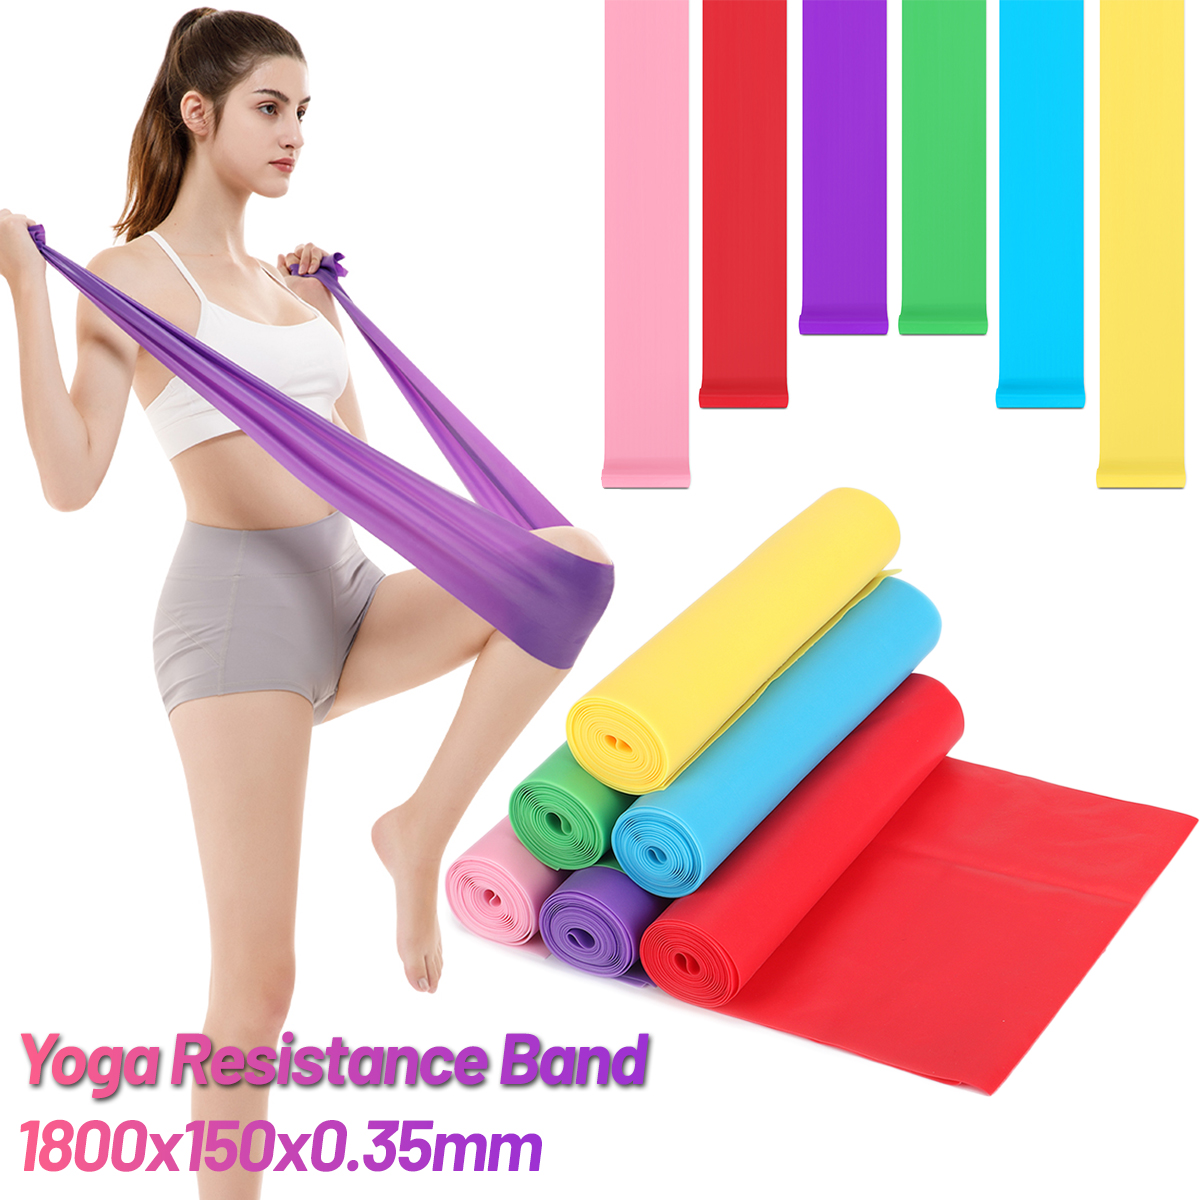 18M-Toning-Elastic-Yoga-Stretch-Resistance-Bands-Fitness-Exercise-Pilates-Straps-Home-Workout-GYM-1708294-1